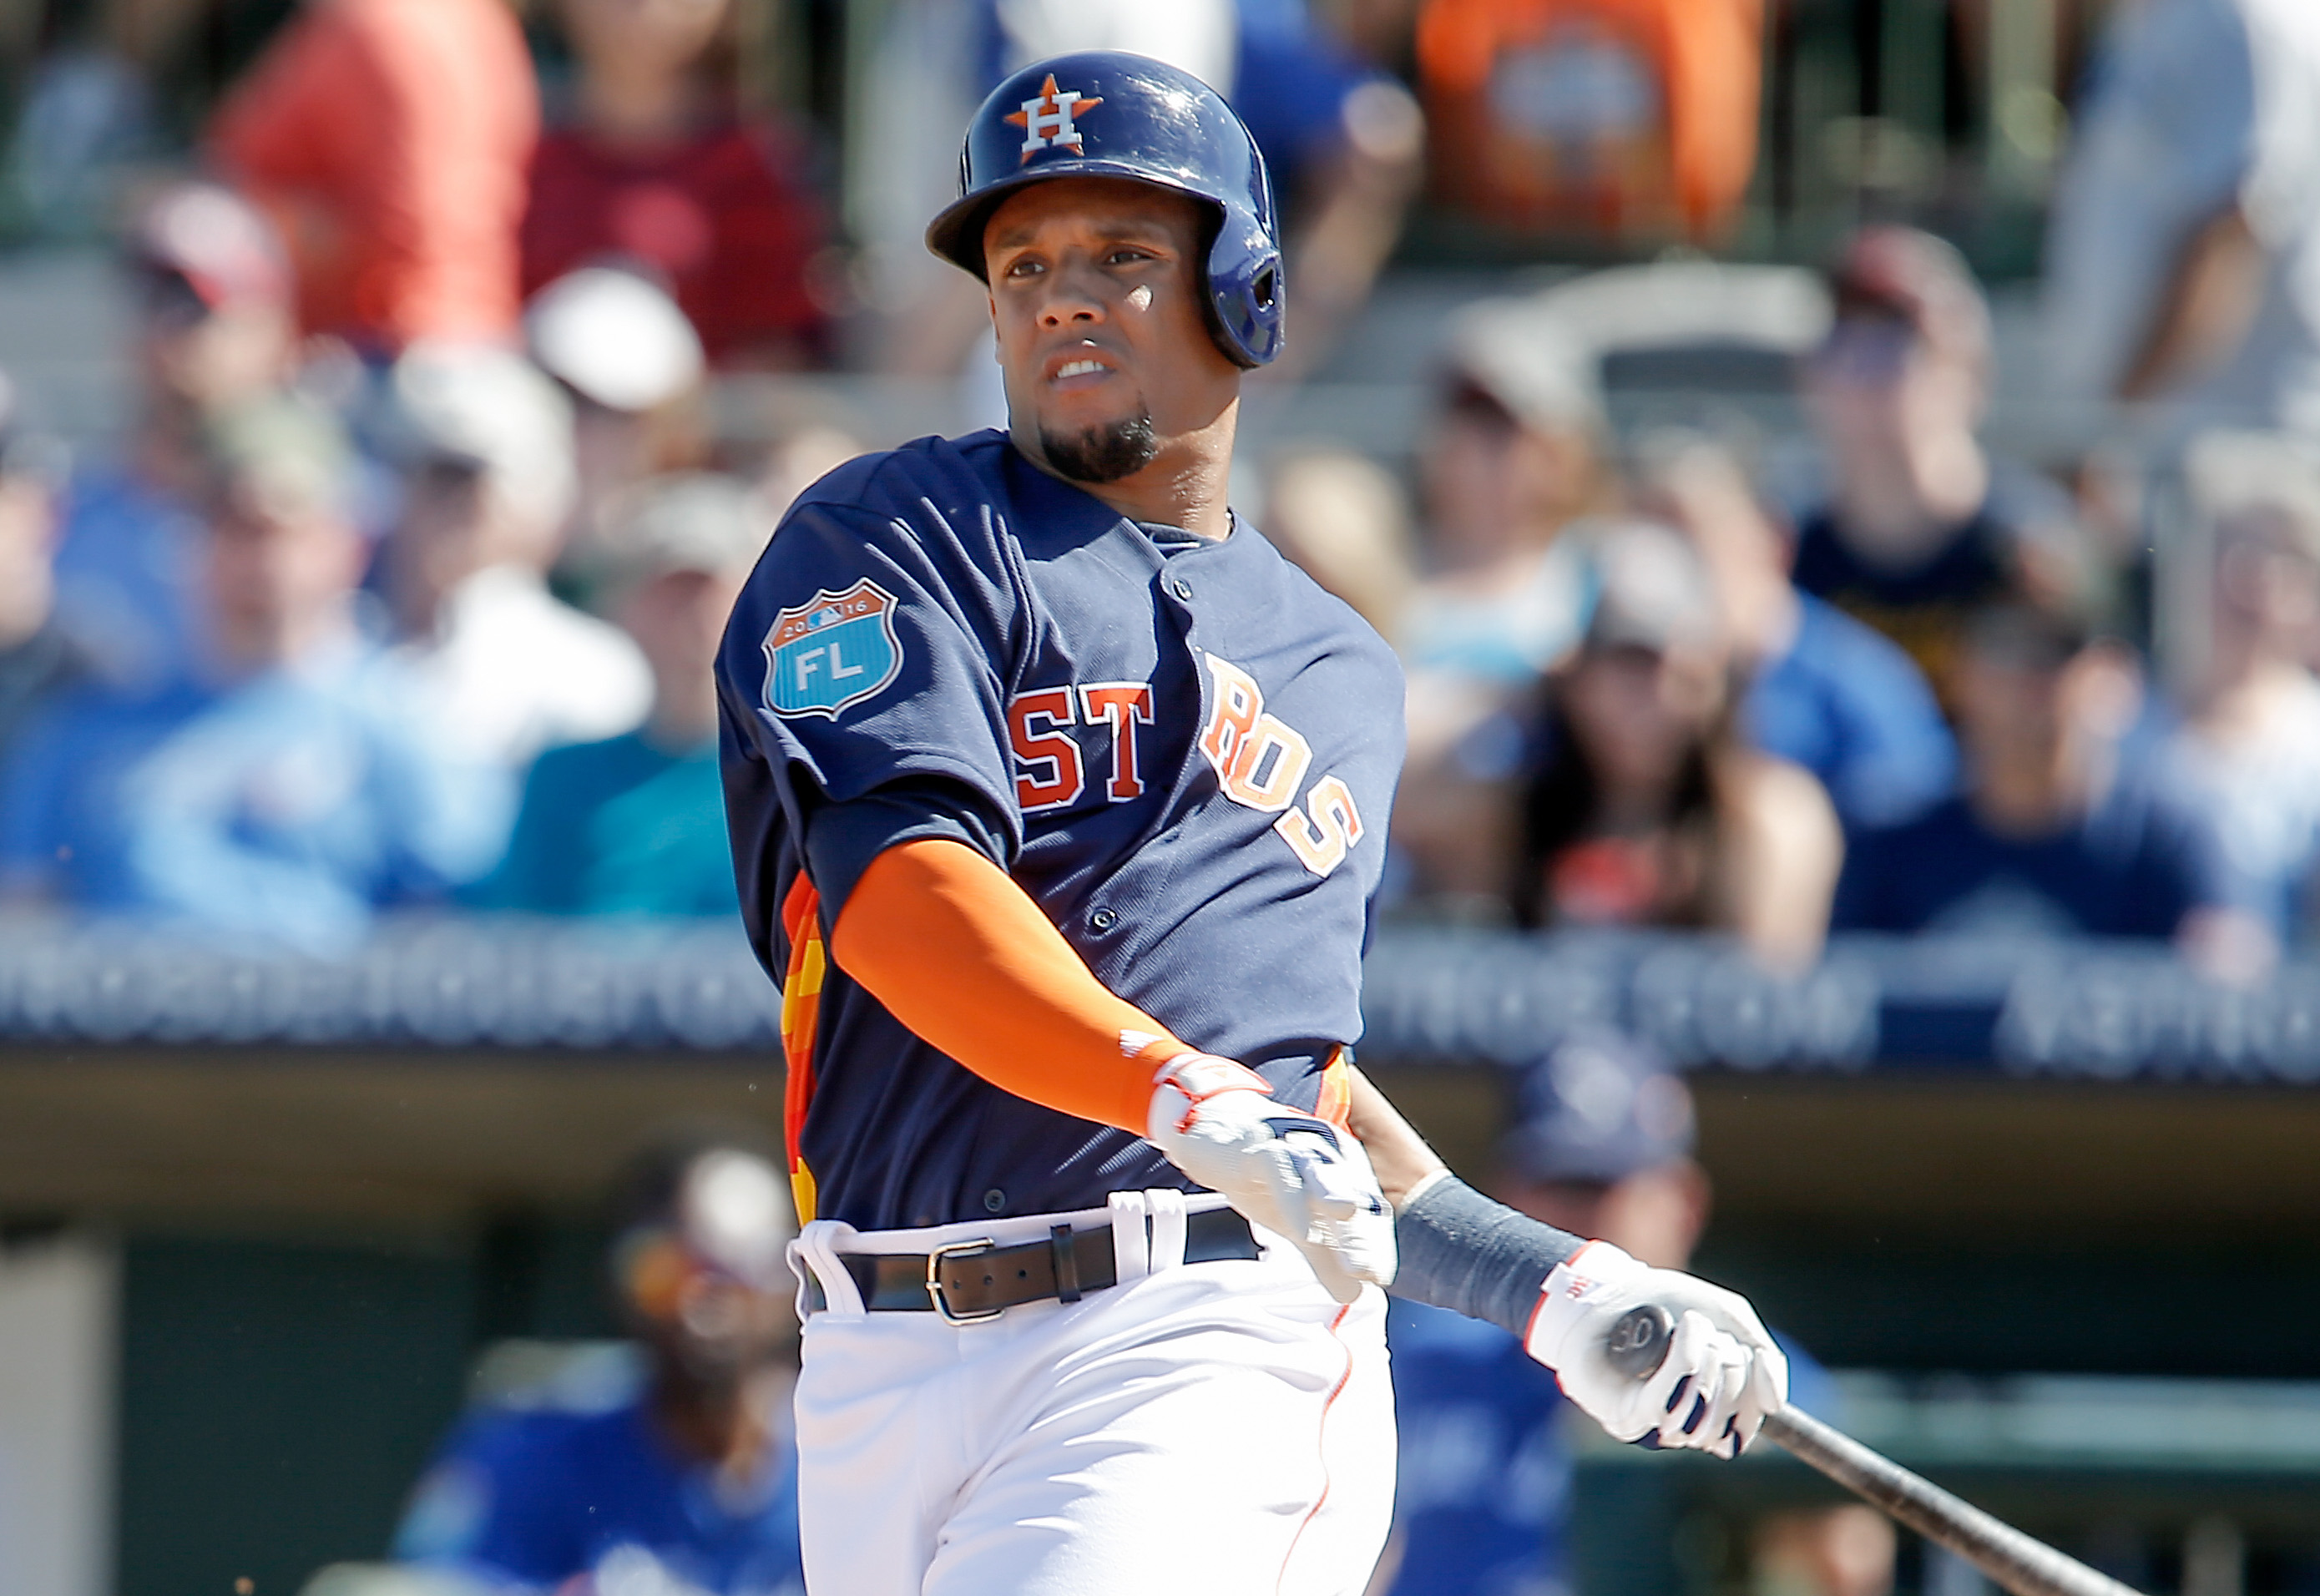 Astros GM: Gomez has to start hitting to avoid being benched | khou.com